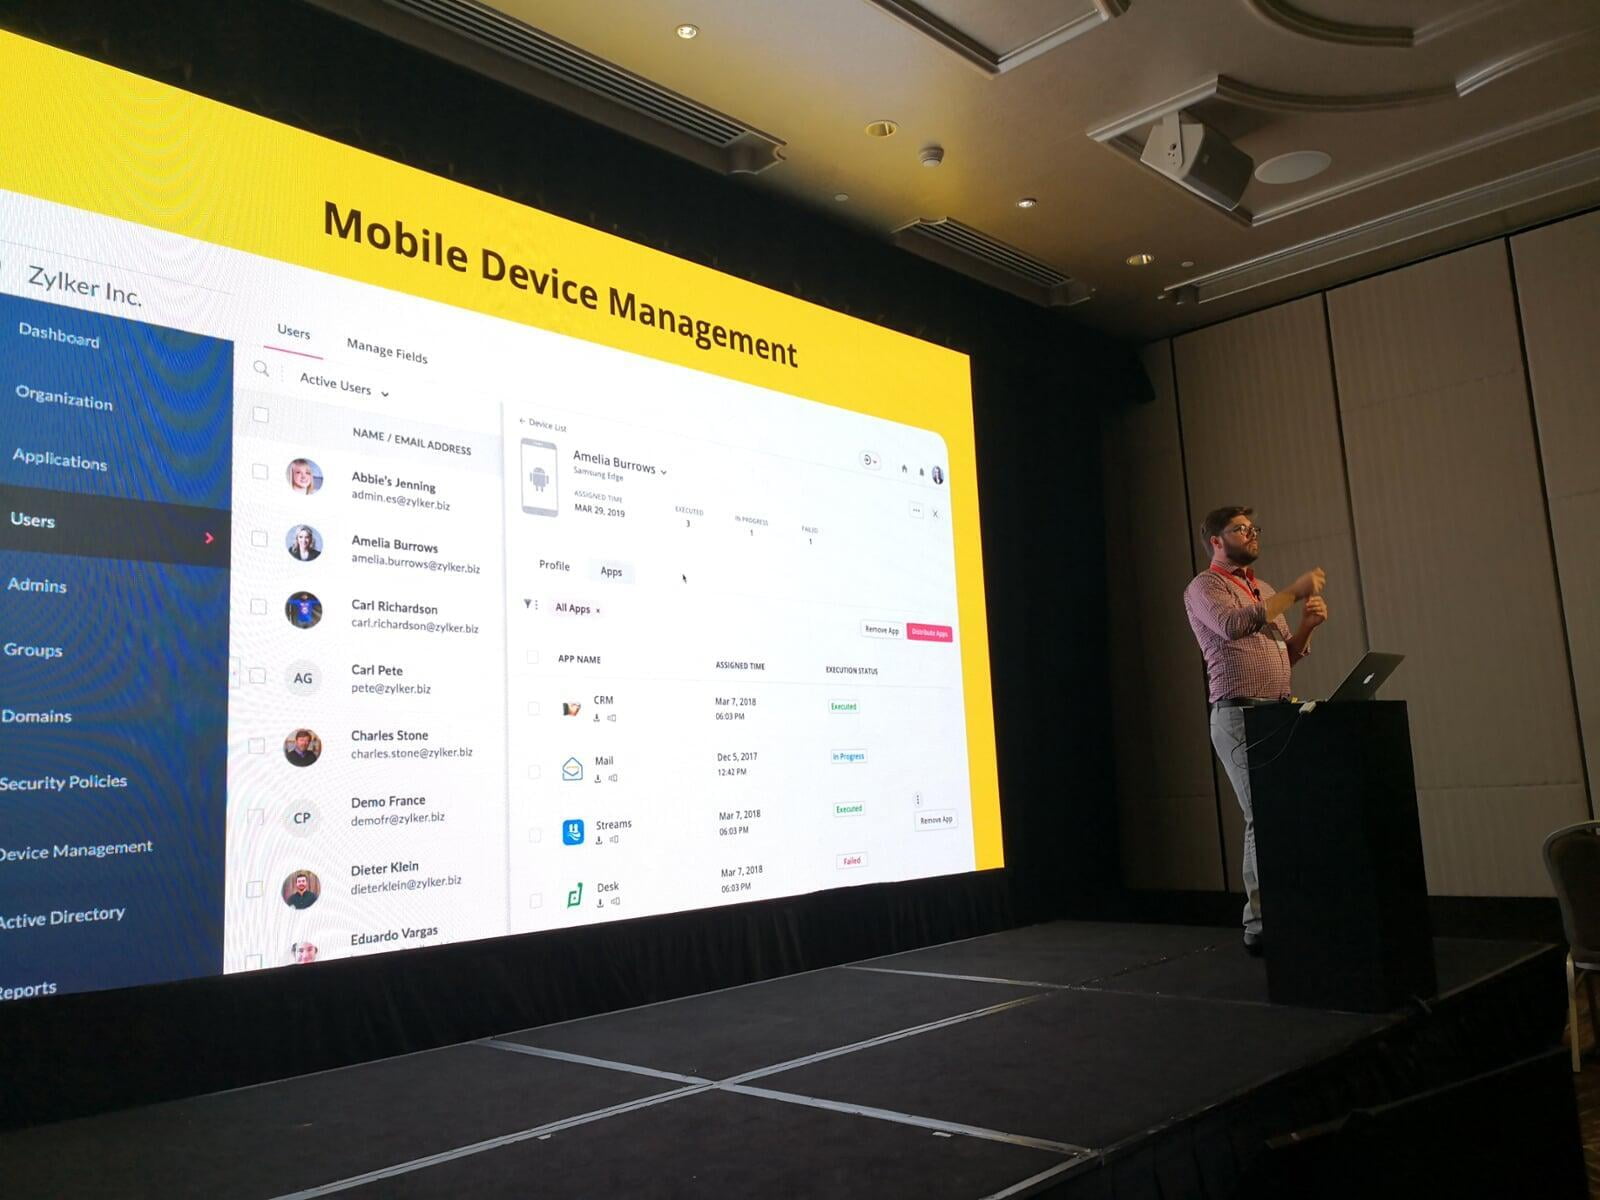 Taylor Backman of Zoho Corporation provides a sneak peak at Zoho Mobile Device Management